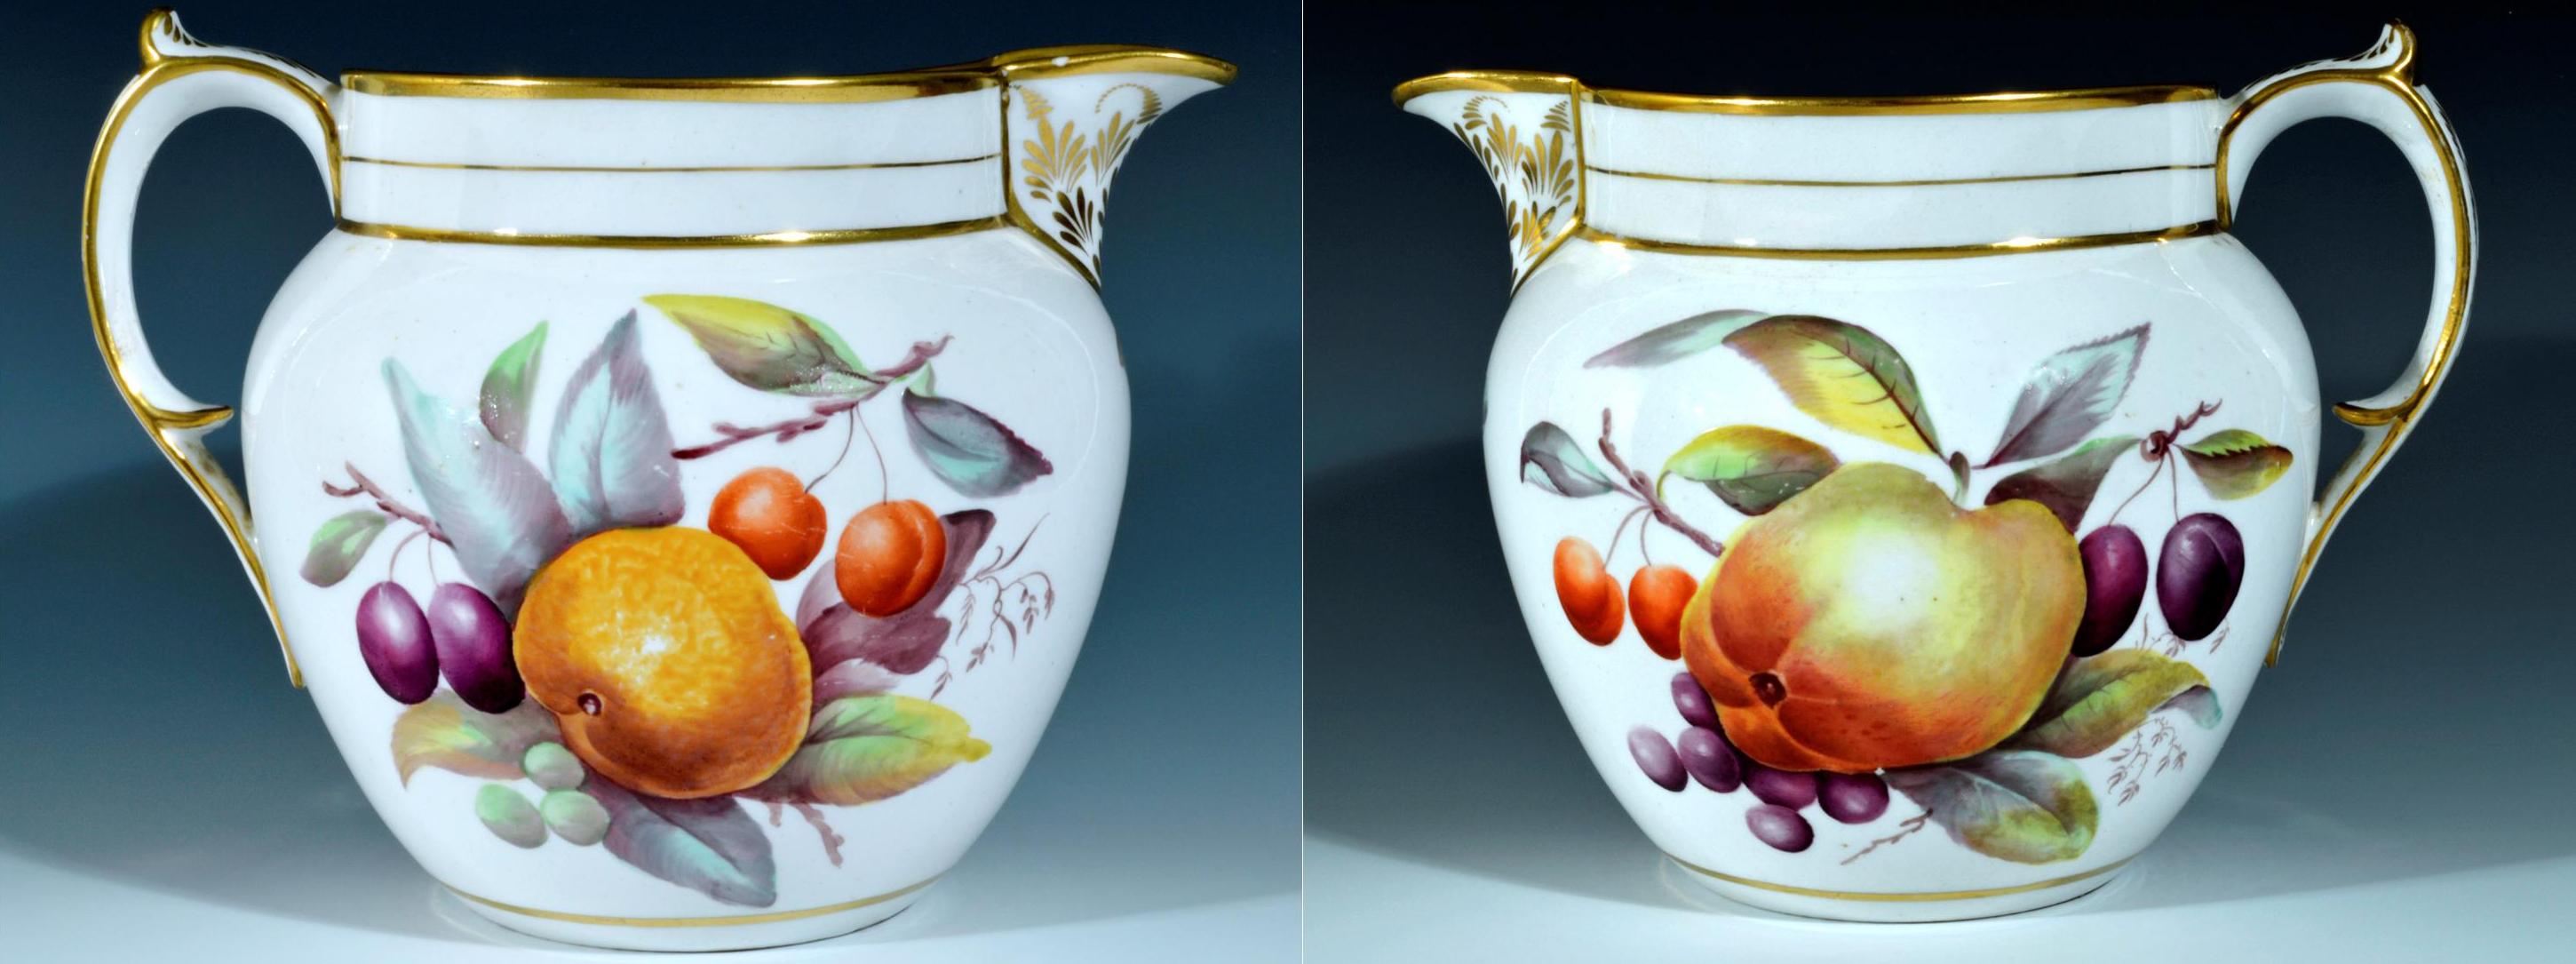 The Davenport Porcelain jug is beautifully painted with groupings of fruit to each side of body and below the spout is a painted pear. Around the rim are gilt bands and the spout and handle are well painted with gilt leaves.

Reference: The same